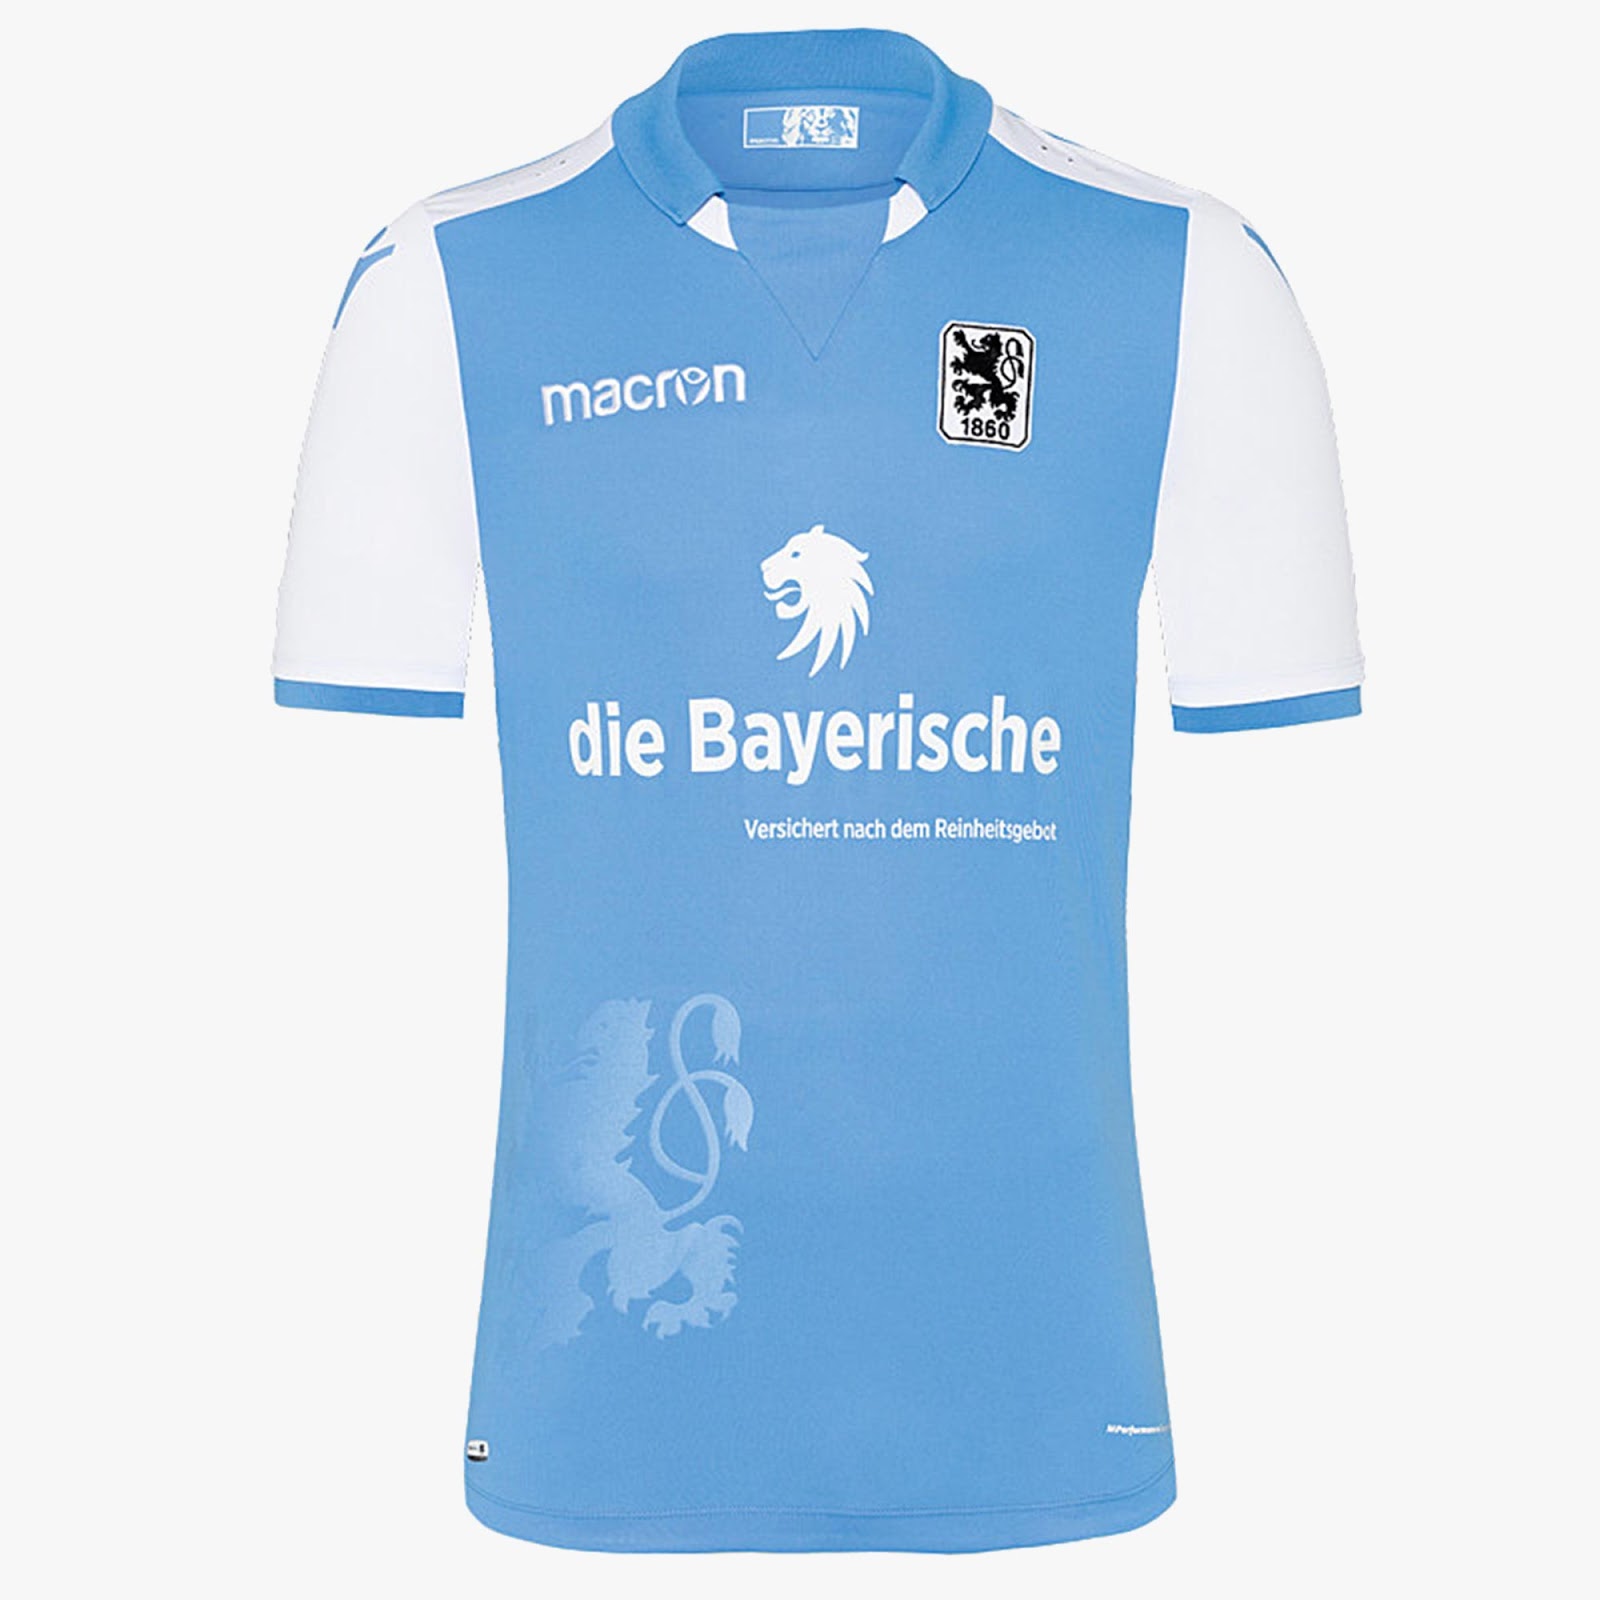 TSV 1860 München to be exclusively marketed by Infront